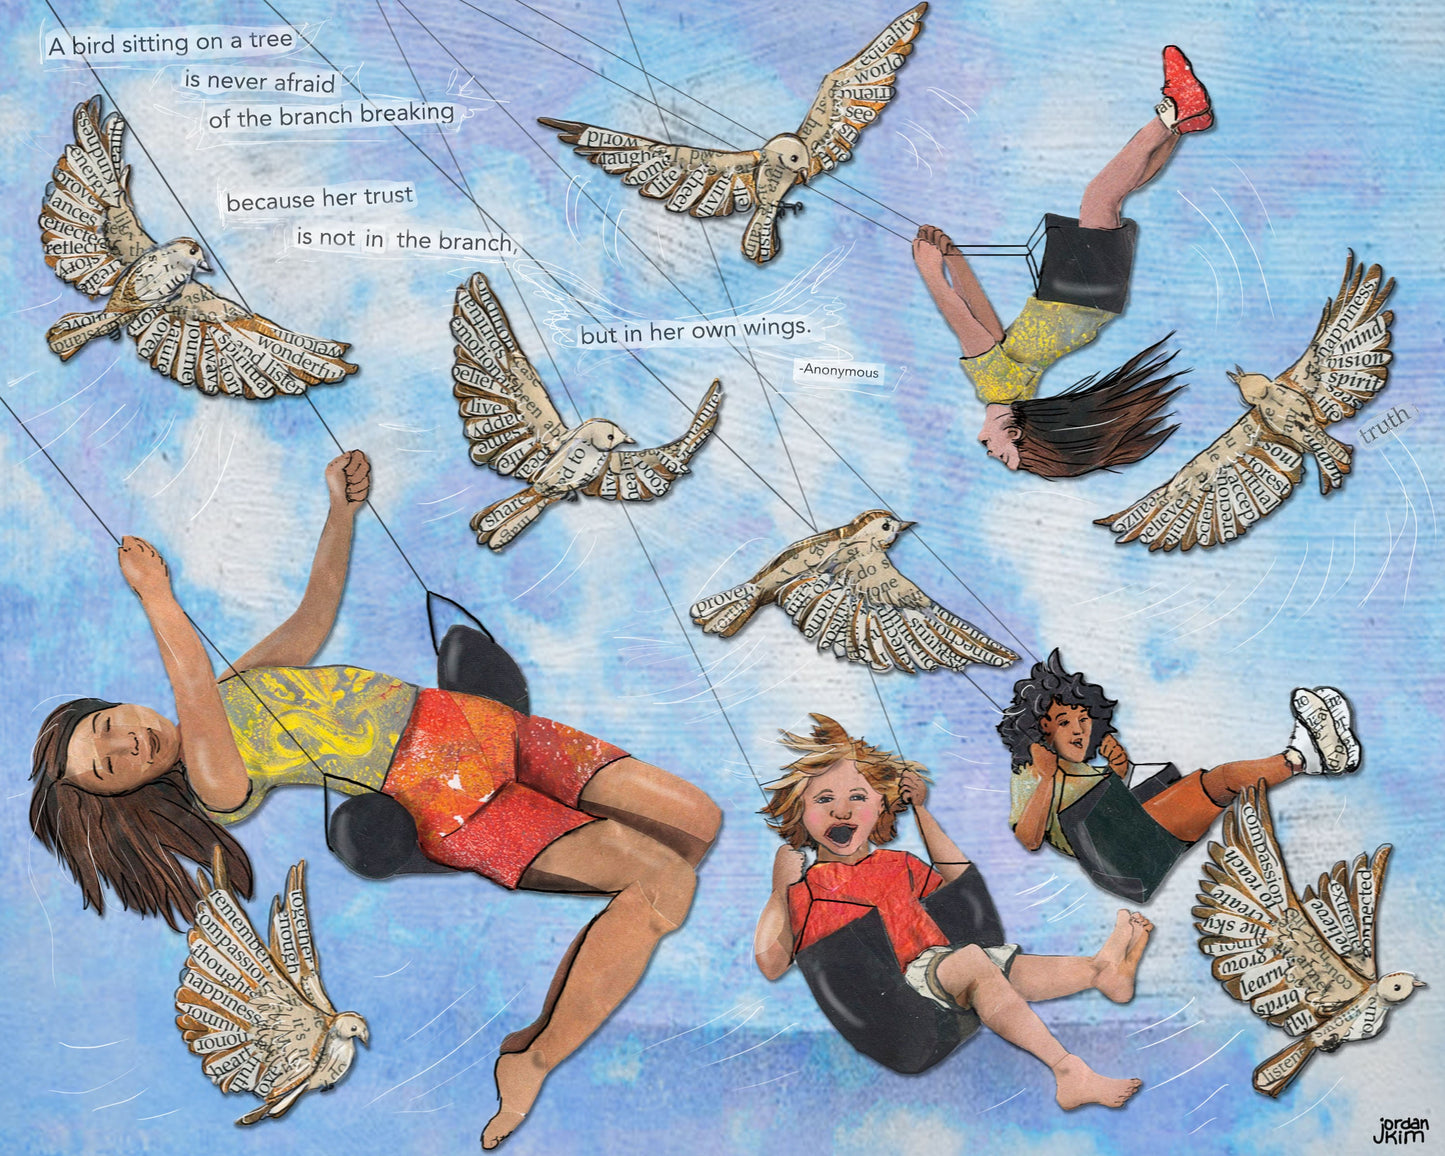 8x10 Art Print of a mixed media collage of children swinging in the air with birds flying around them, inspirational quote